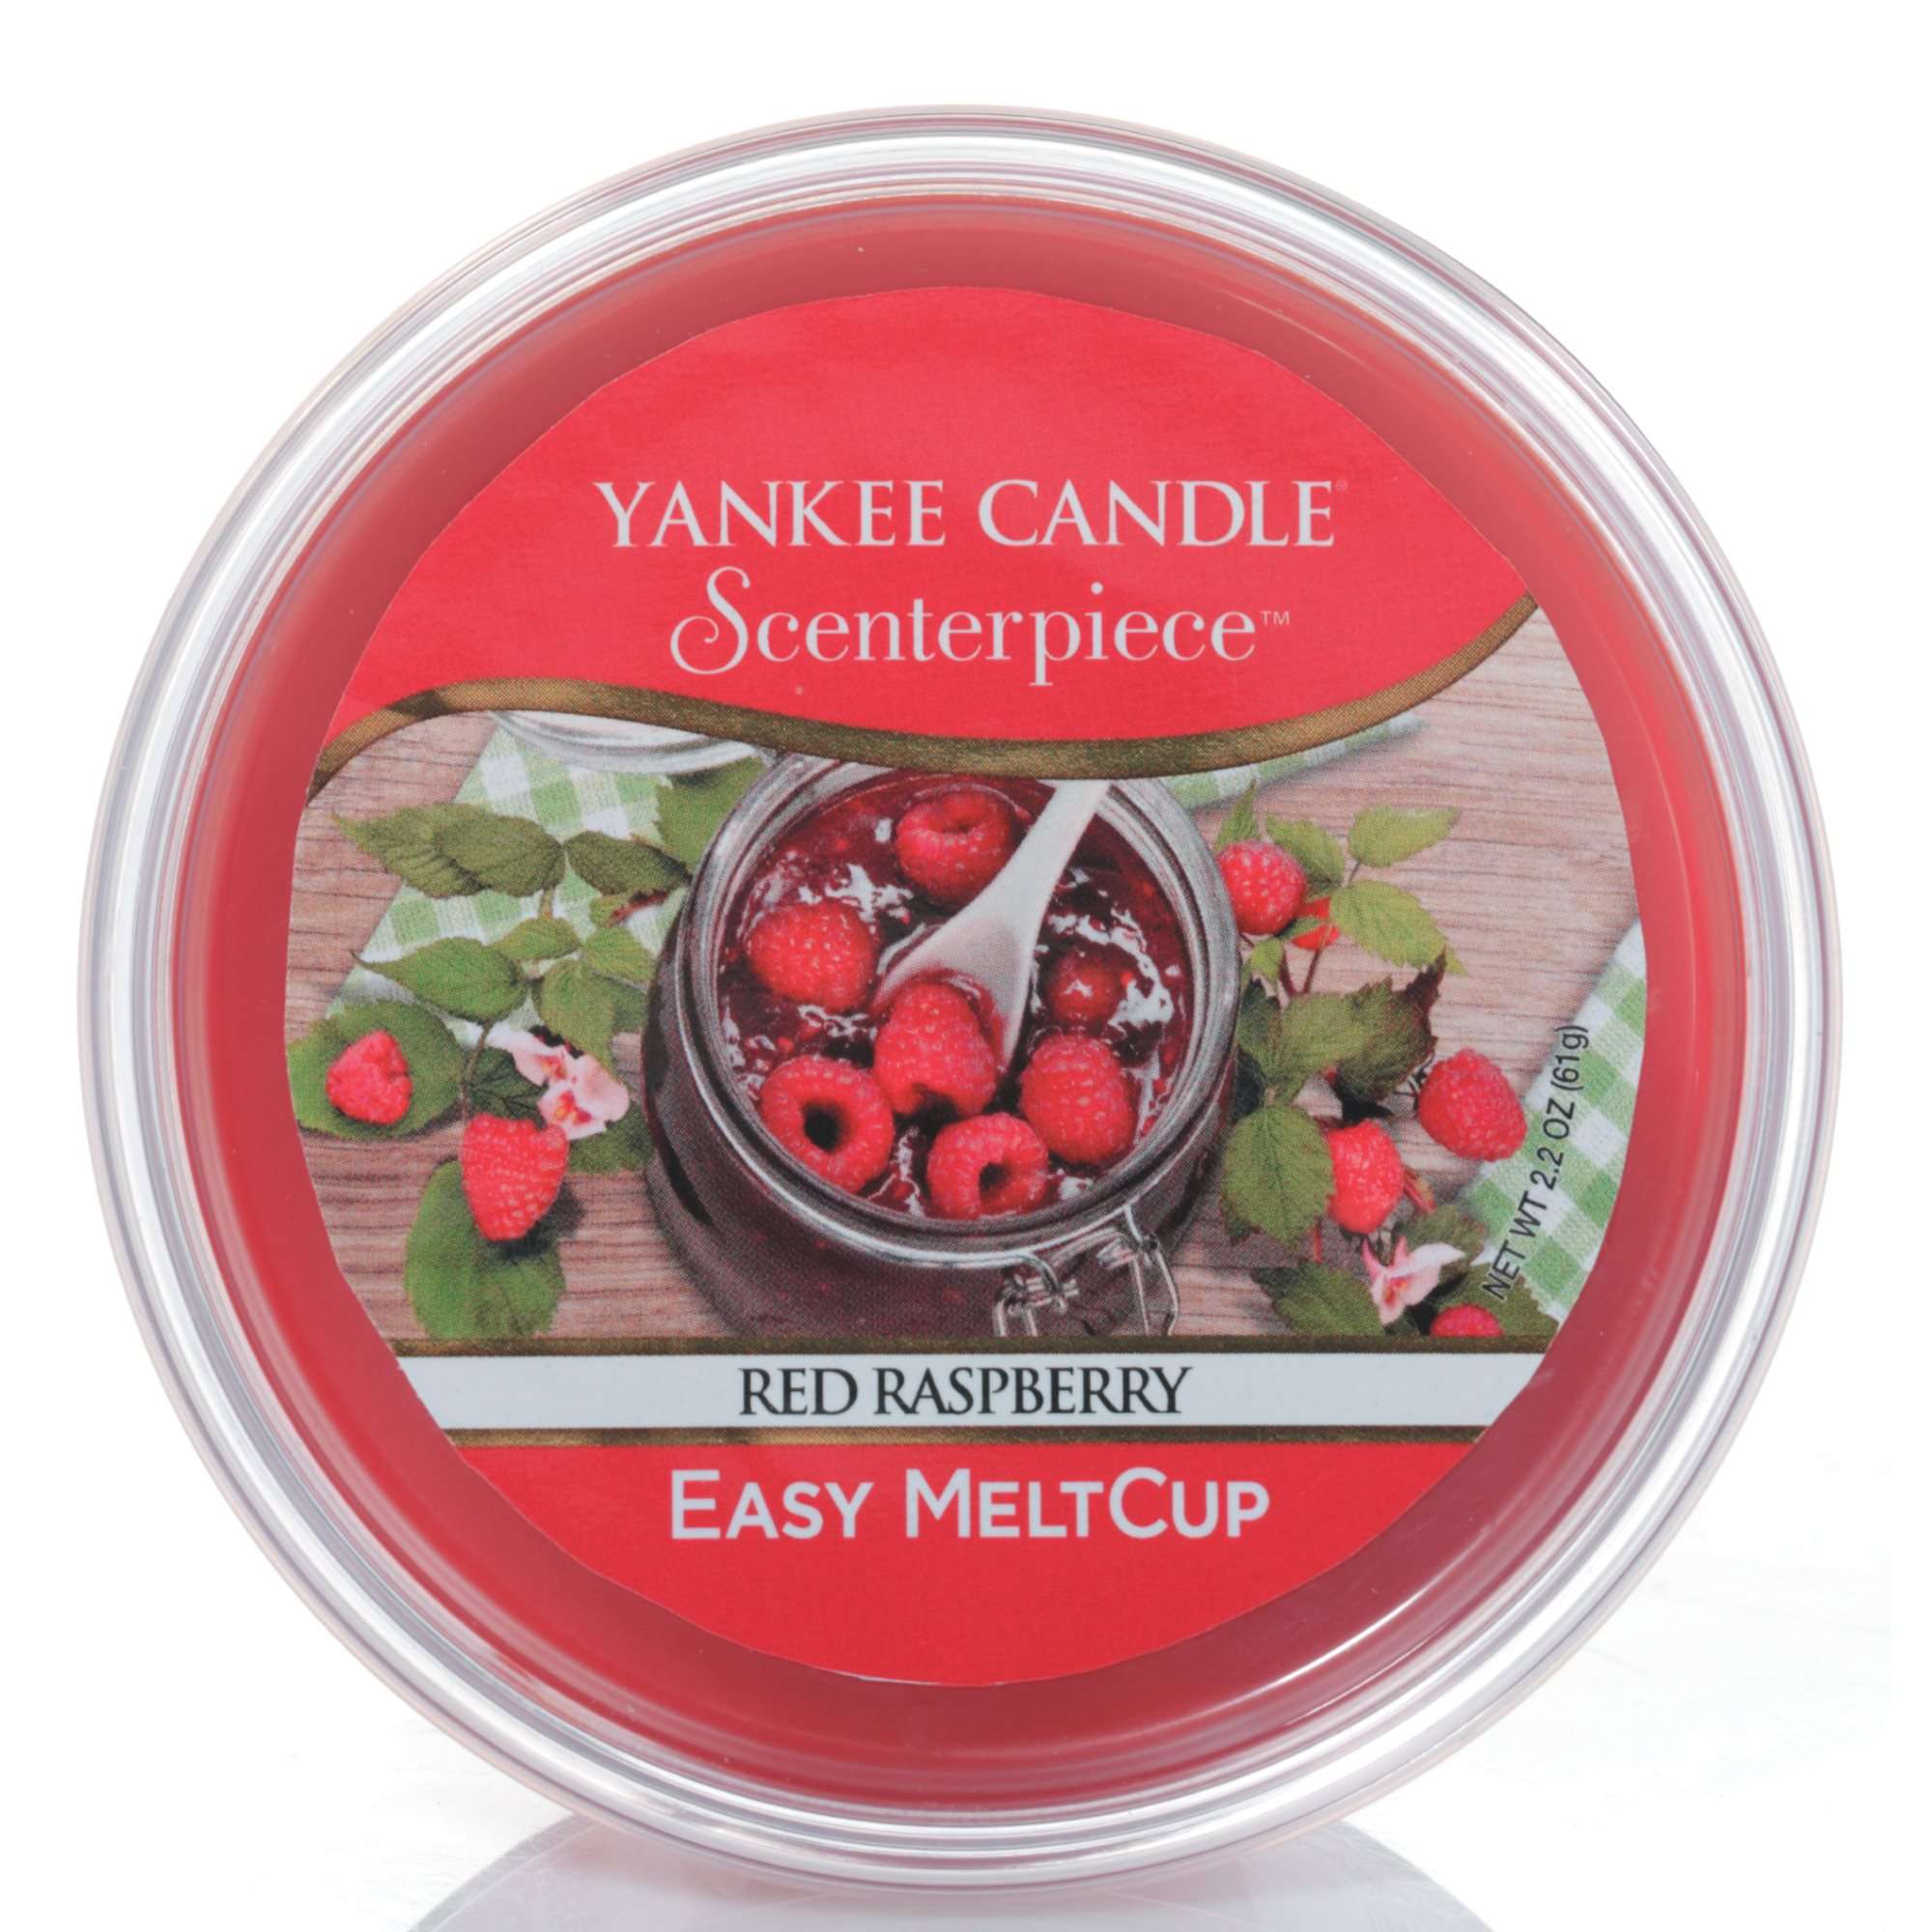 Yankee Candle scenterpiece Easy meltcup Red Apple Wreath 61 g Tasse